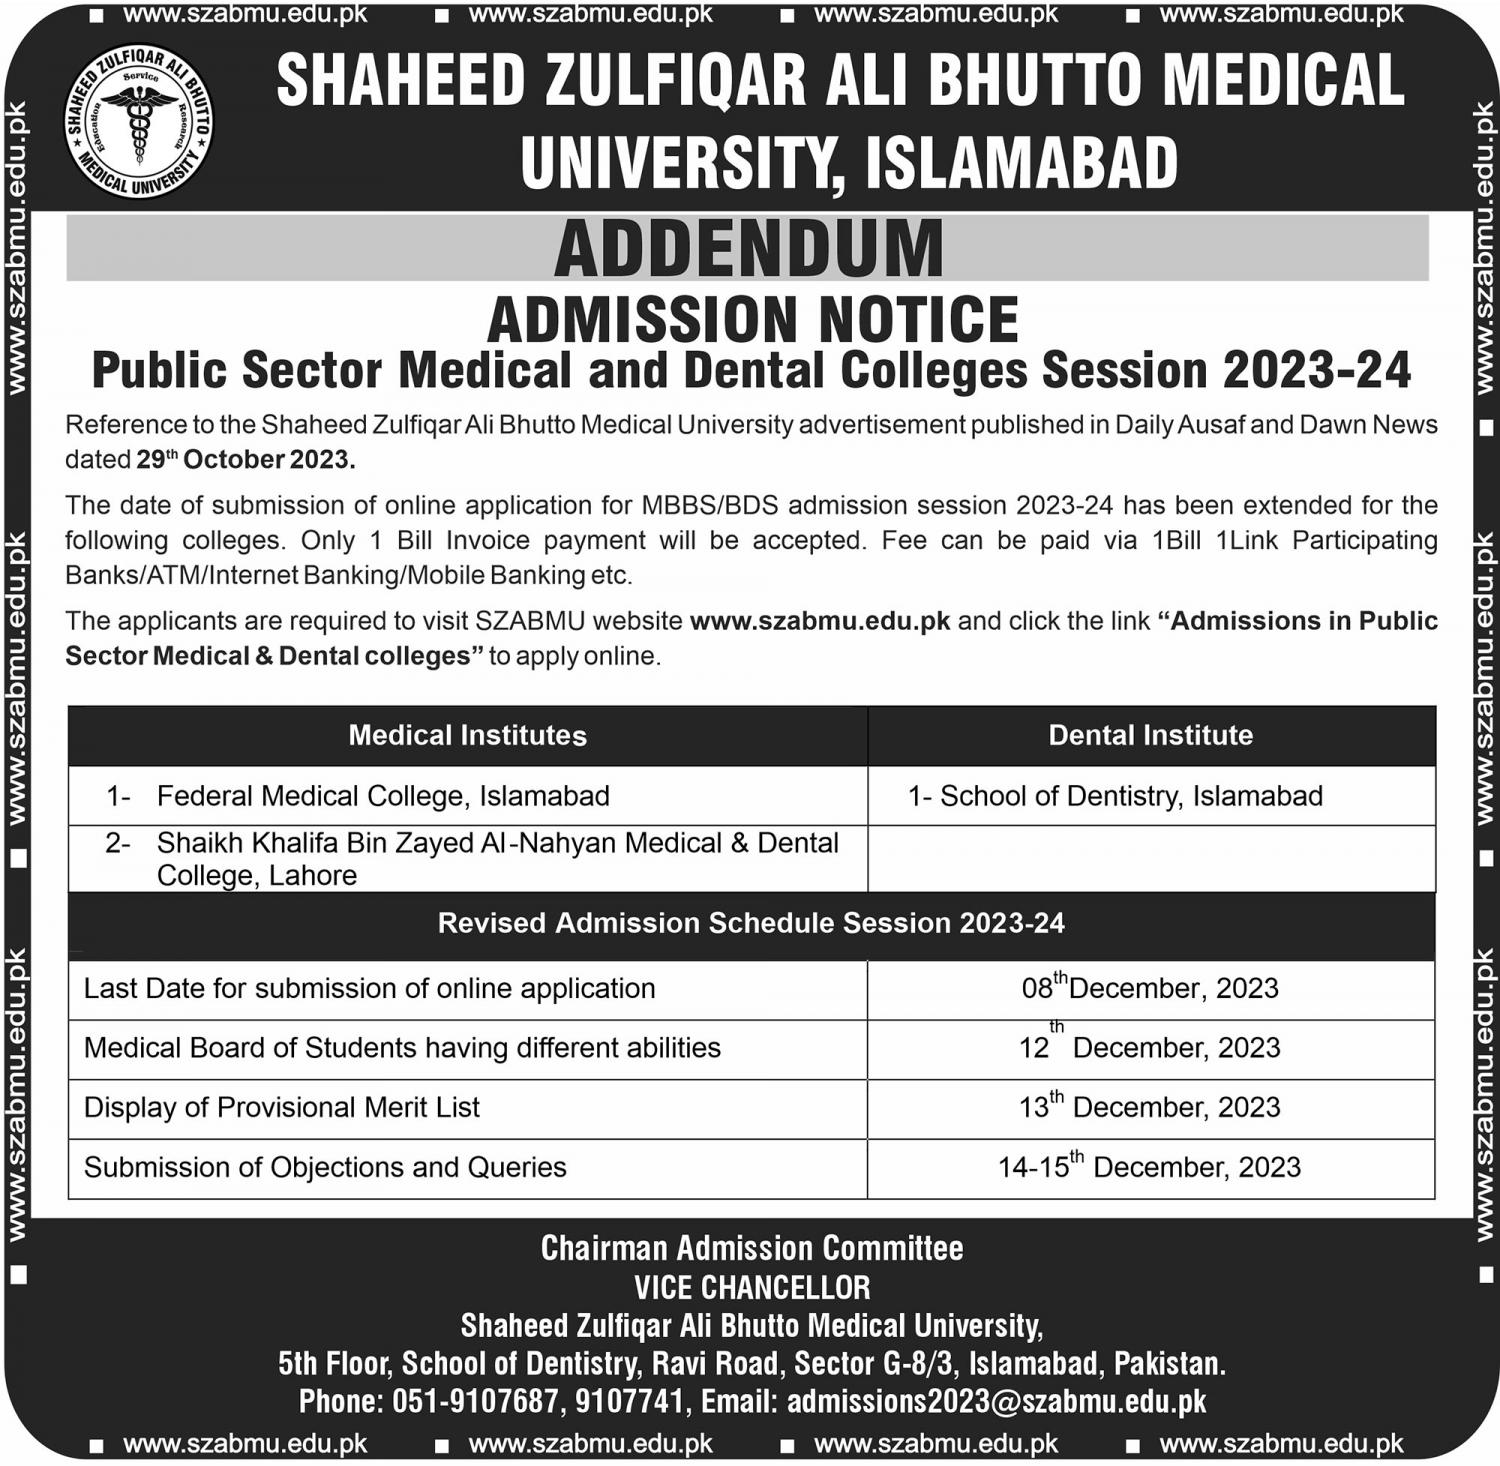 DATE EXTENDED ADMISSION NOTICE - PUBLIC SECTOR MEDICAL AND DENTAL COLLEGES SESSION 2023-24